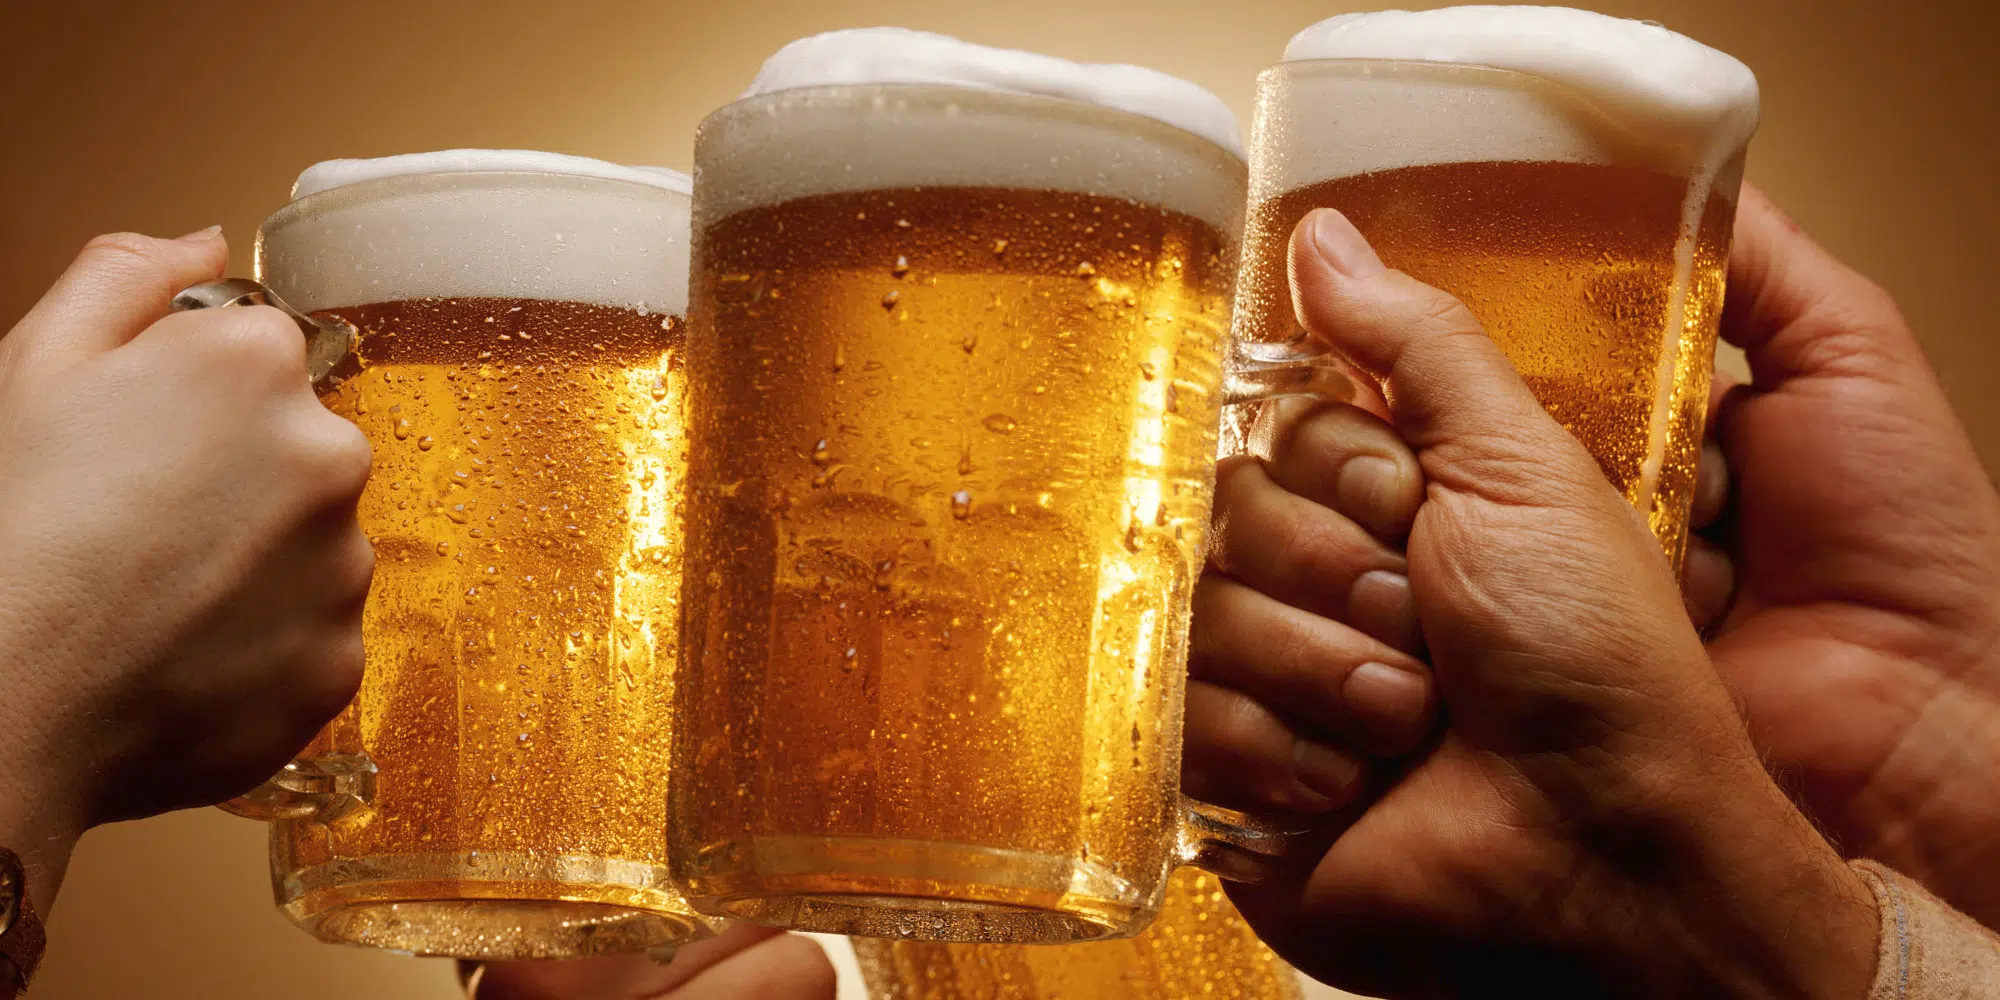 Beer Facts to Share on International Beer Day